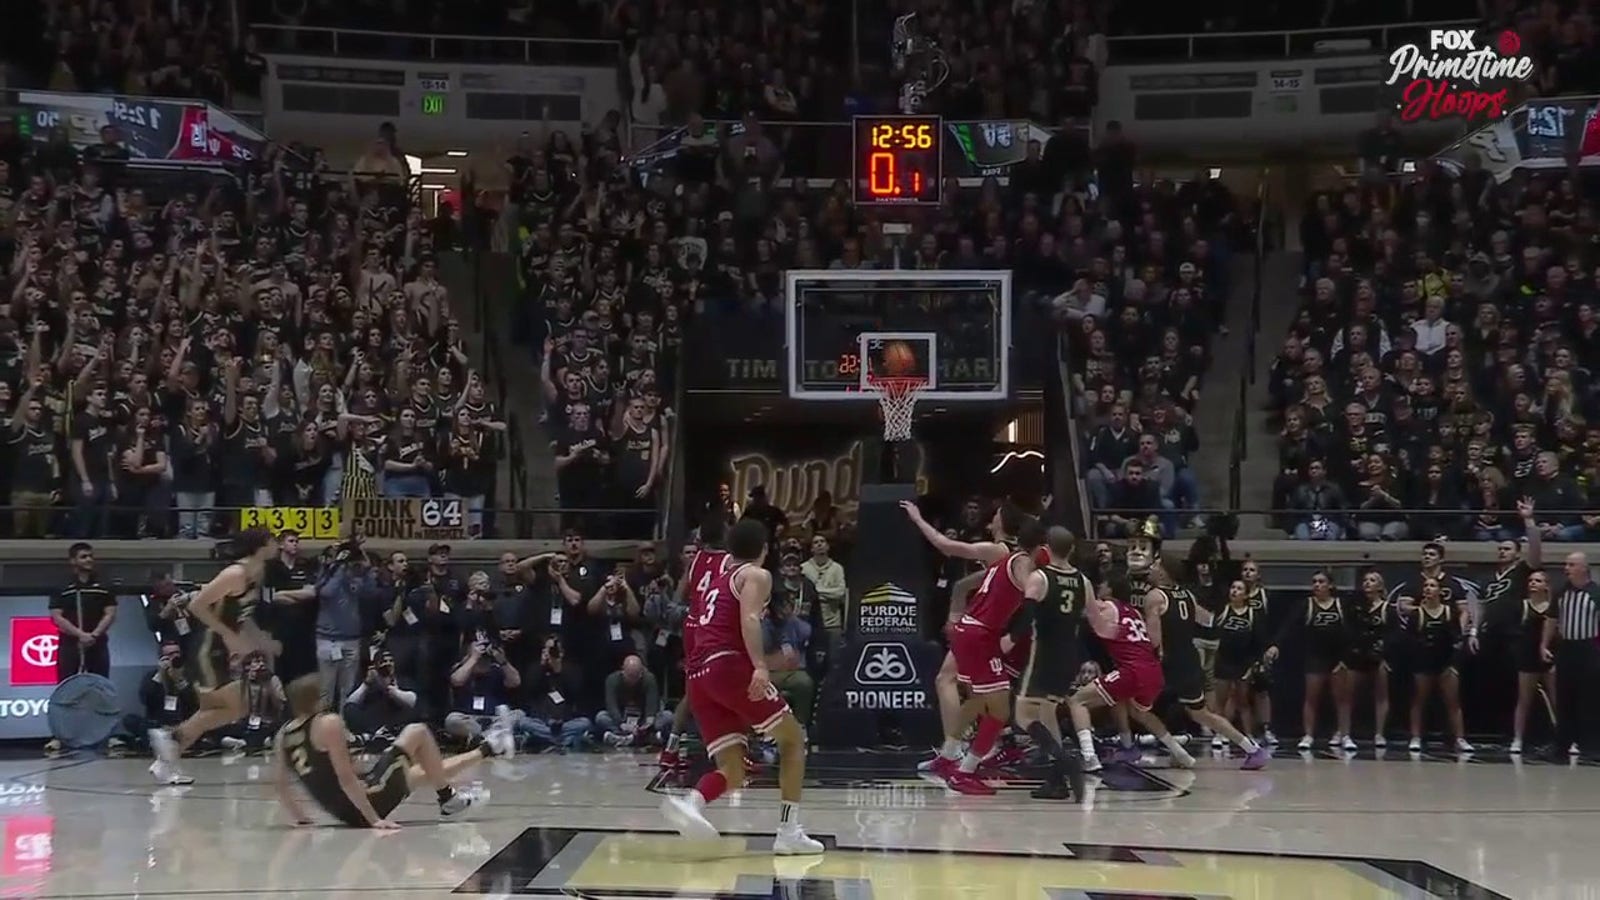 Purdue's Fletcher Loyer knocks down a 3-pointer while being fouled vs. Indiana